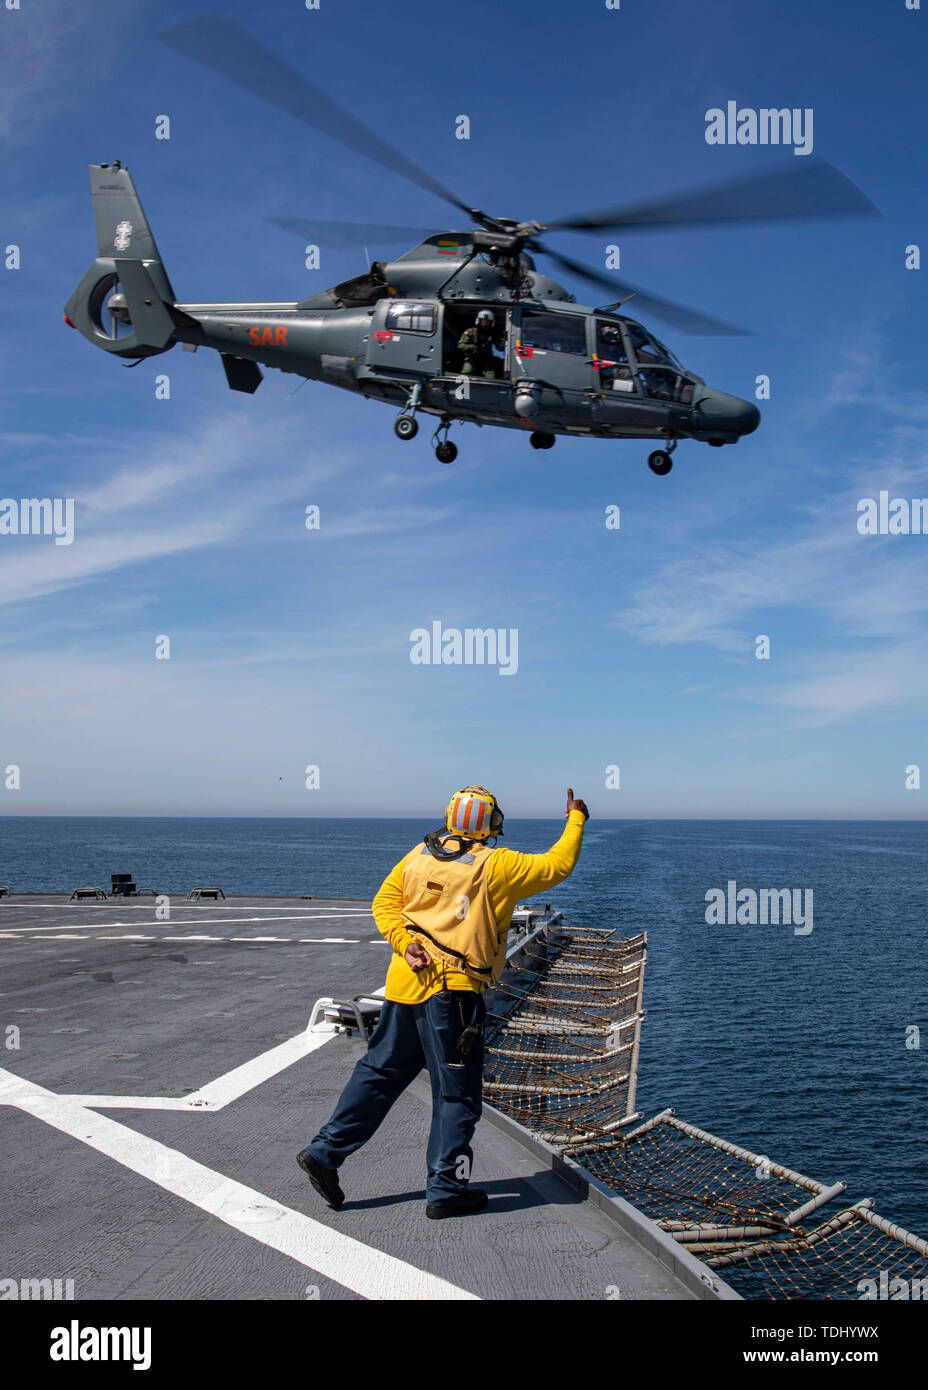 190615-N-EI510-0161 BALTIC SEA (June 15, 2019) A Military Sealift Command civilian mariner assigned to the Blue Ridge class command and control ship USS Mount Whitney (LCC 20) guides a Lithuanian Air Force Dauphin AS365 Helicopter off the flight deck of the Mount Whitney during exercise Baltic Operations (BALTOPS) 2019. BALTOPS is the premier annual maritime-focused exercise in the Baltic Region, marking the 47th year of one of the largest exercises in Northern Europe enhancing flexibility and interoperability among allied and partnered nations.  (U.S. Navy Photo by Mass Communication Speciali Stock Photo